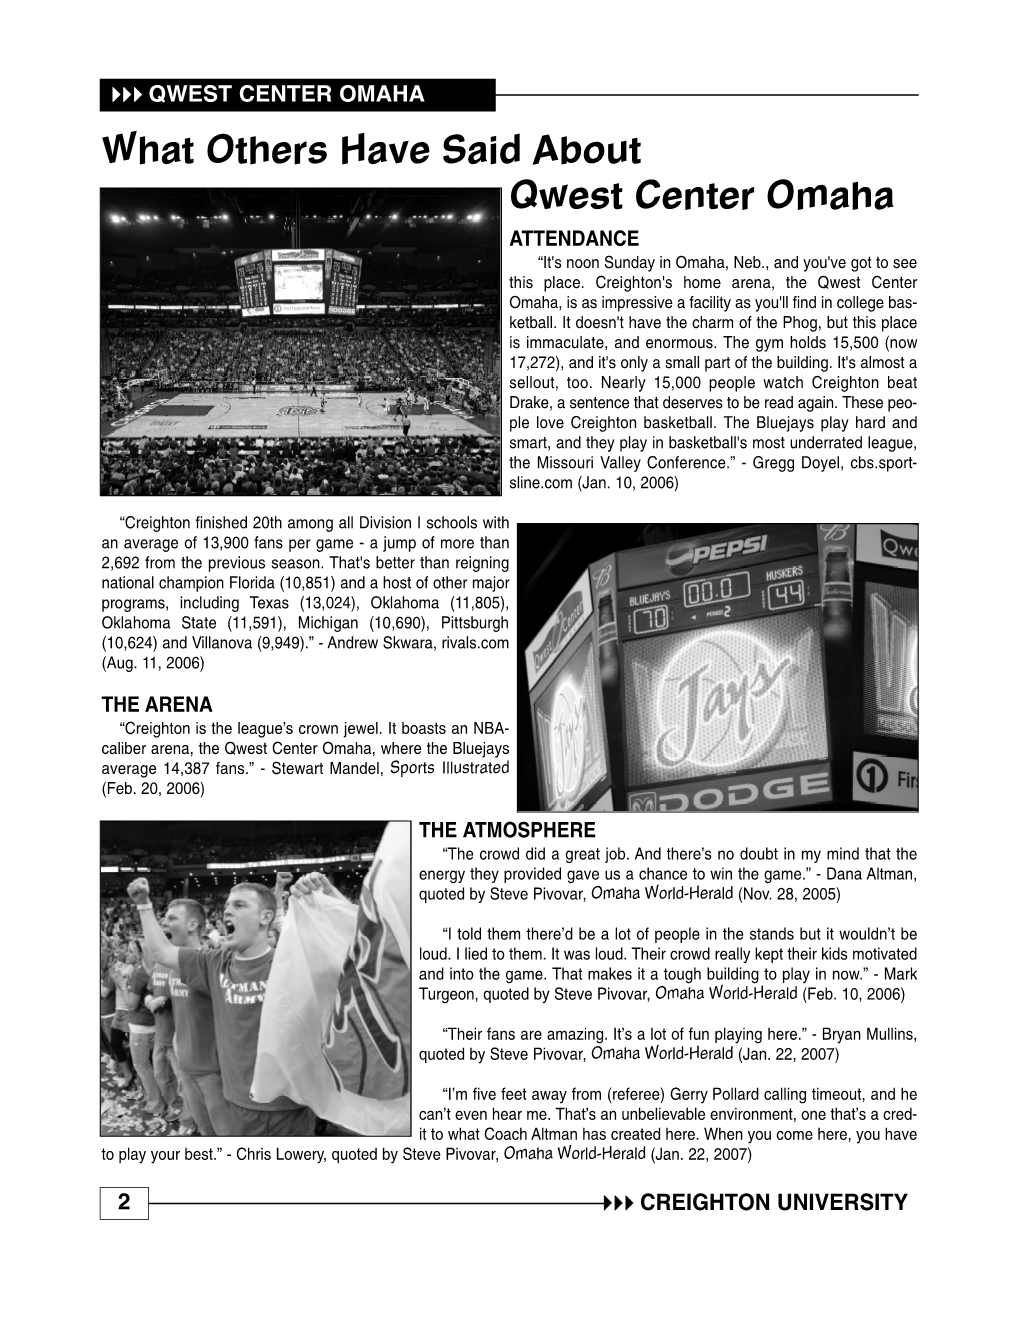 What Others Have Said About Qwest Center Omaha ATTENDANCE “It's Noon Sunday in Omaha, Neb., and You've Got to See This Place